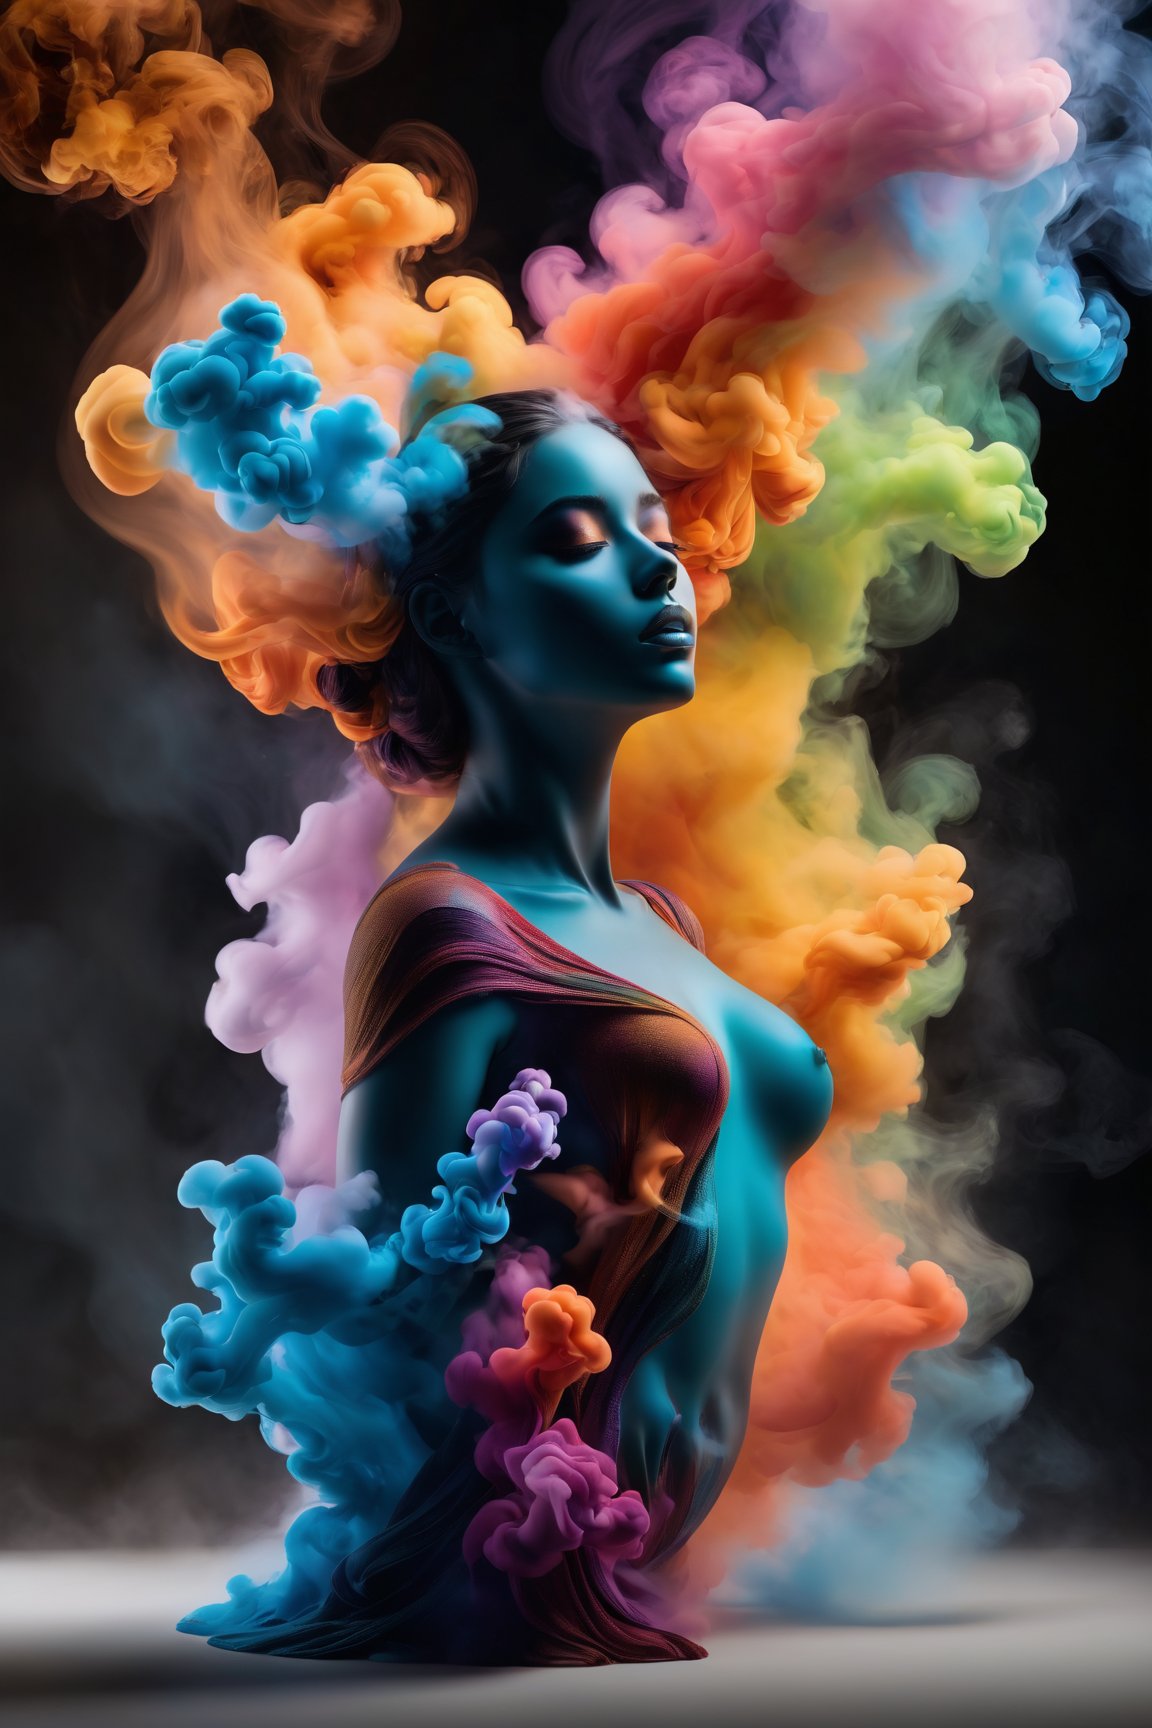 (best quality, 8K, highres, masterpiece), ultra-detailed, (portrait art, illustration), full-body zoom of a female-shaped colored sculpture made of dynamic dispersing smoke. The scene features playful body manipulations with warm and clean aesthetics, emphasizing uncommon beauty. Utilizing the rule of thirds composition, the detailed environment with strong lines enhances the overall visual impact. Vibrant and colorful smoke particles float in the air, creating a visually rich and striking figure. The well-lit scene, achieved with studio lights, maintains ultra-sharp focus and a high-speed shot aesthetic